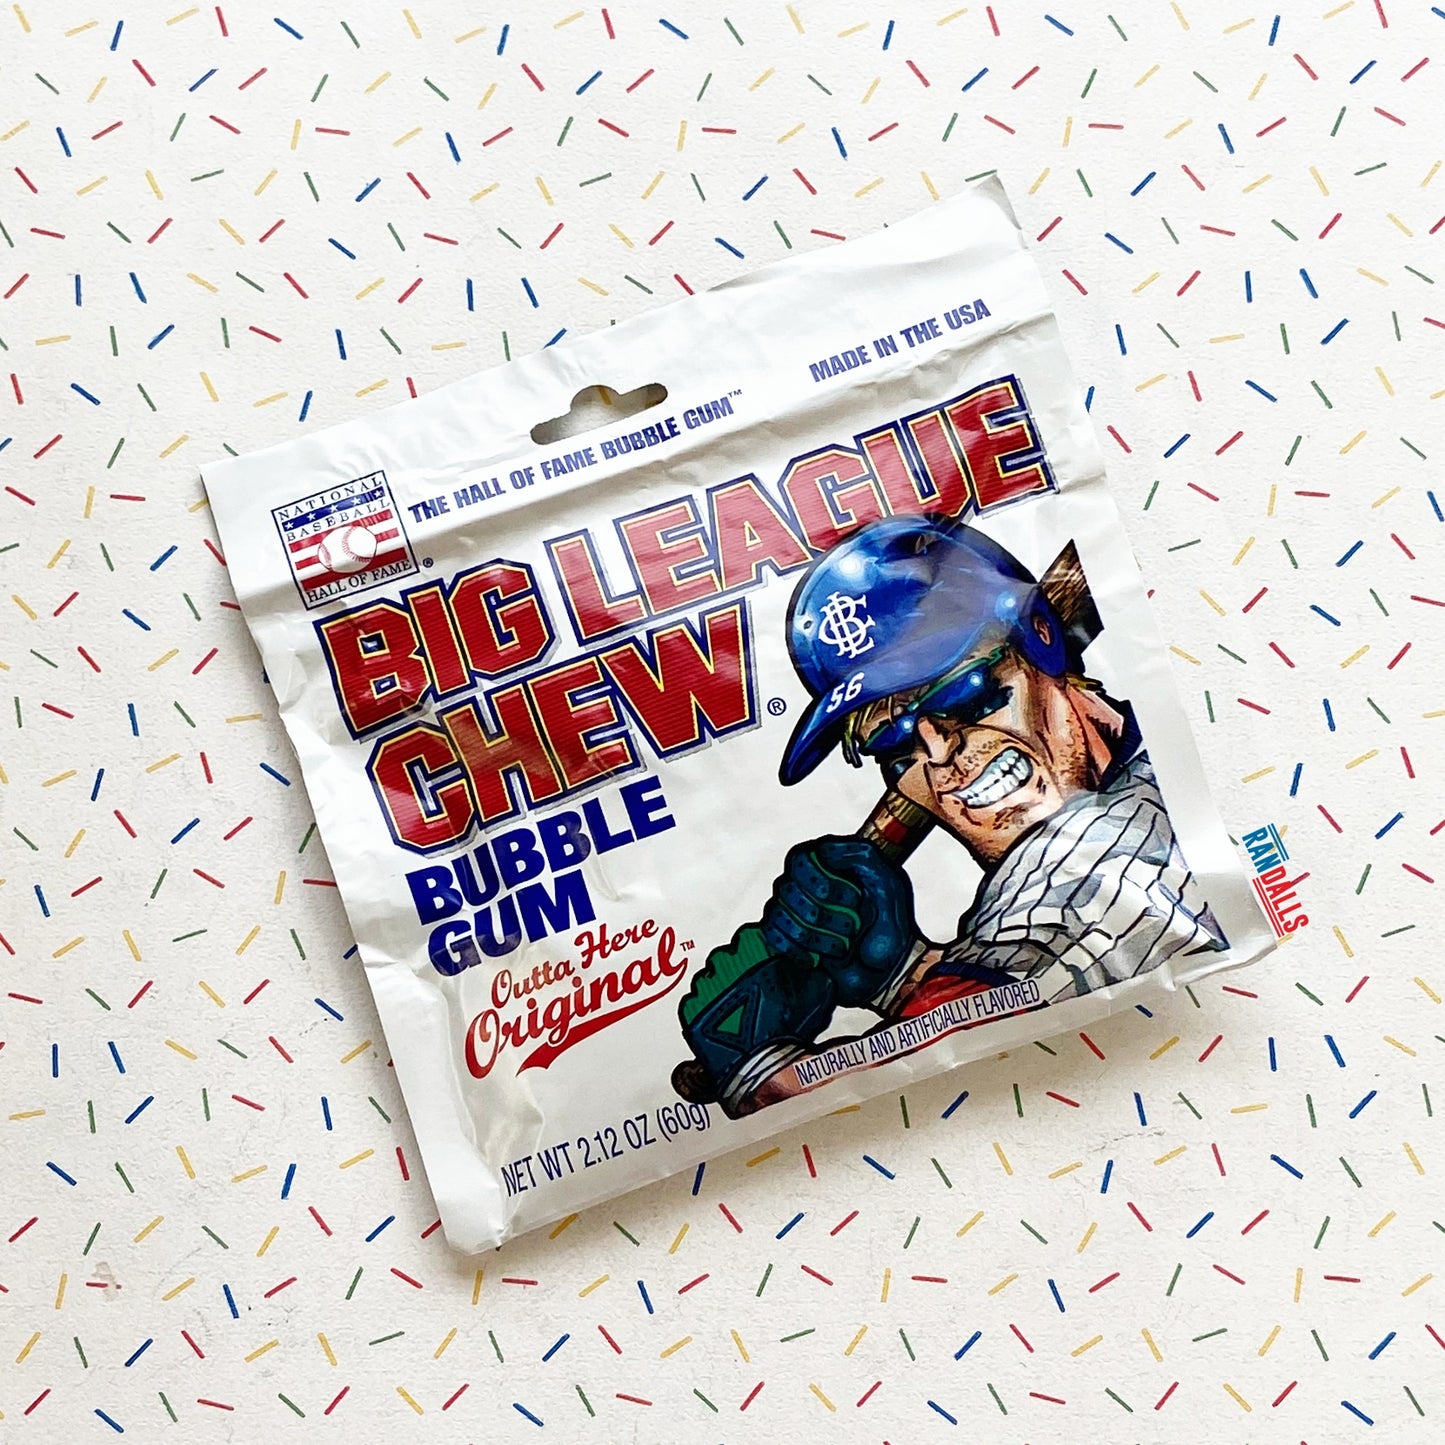 big league chew, bubblegum, chewing gum, national baseball hall of fame, the hall of fame bubble gum, made in the usa, chewing gum, american gum, outta here original, usa, randalls,